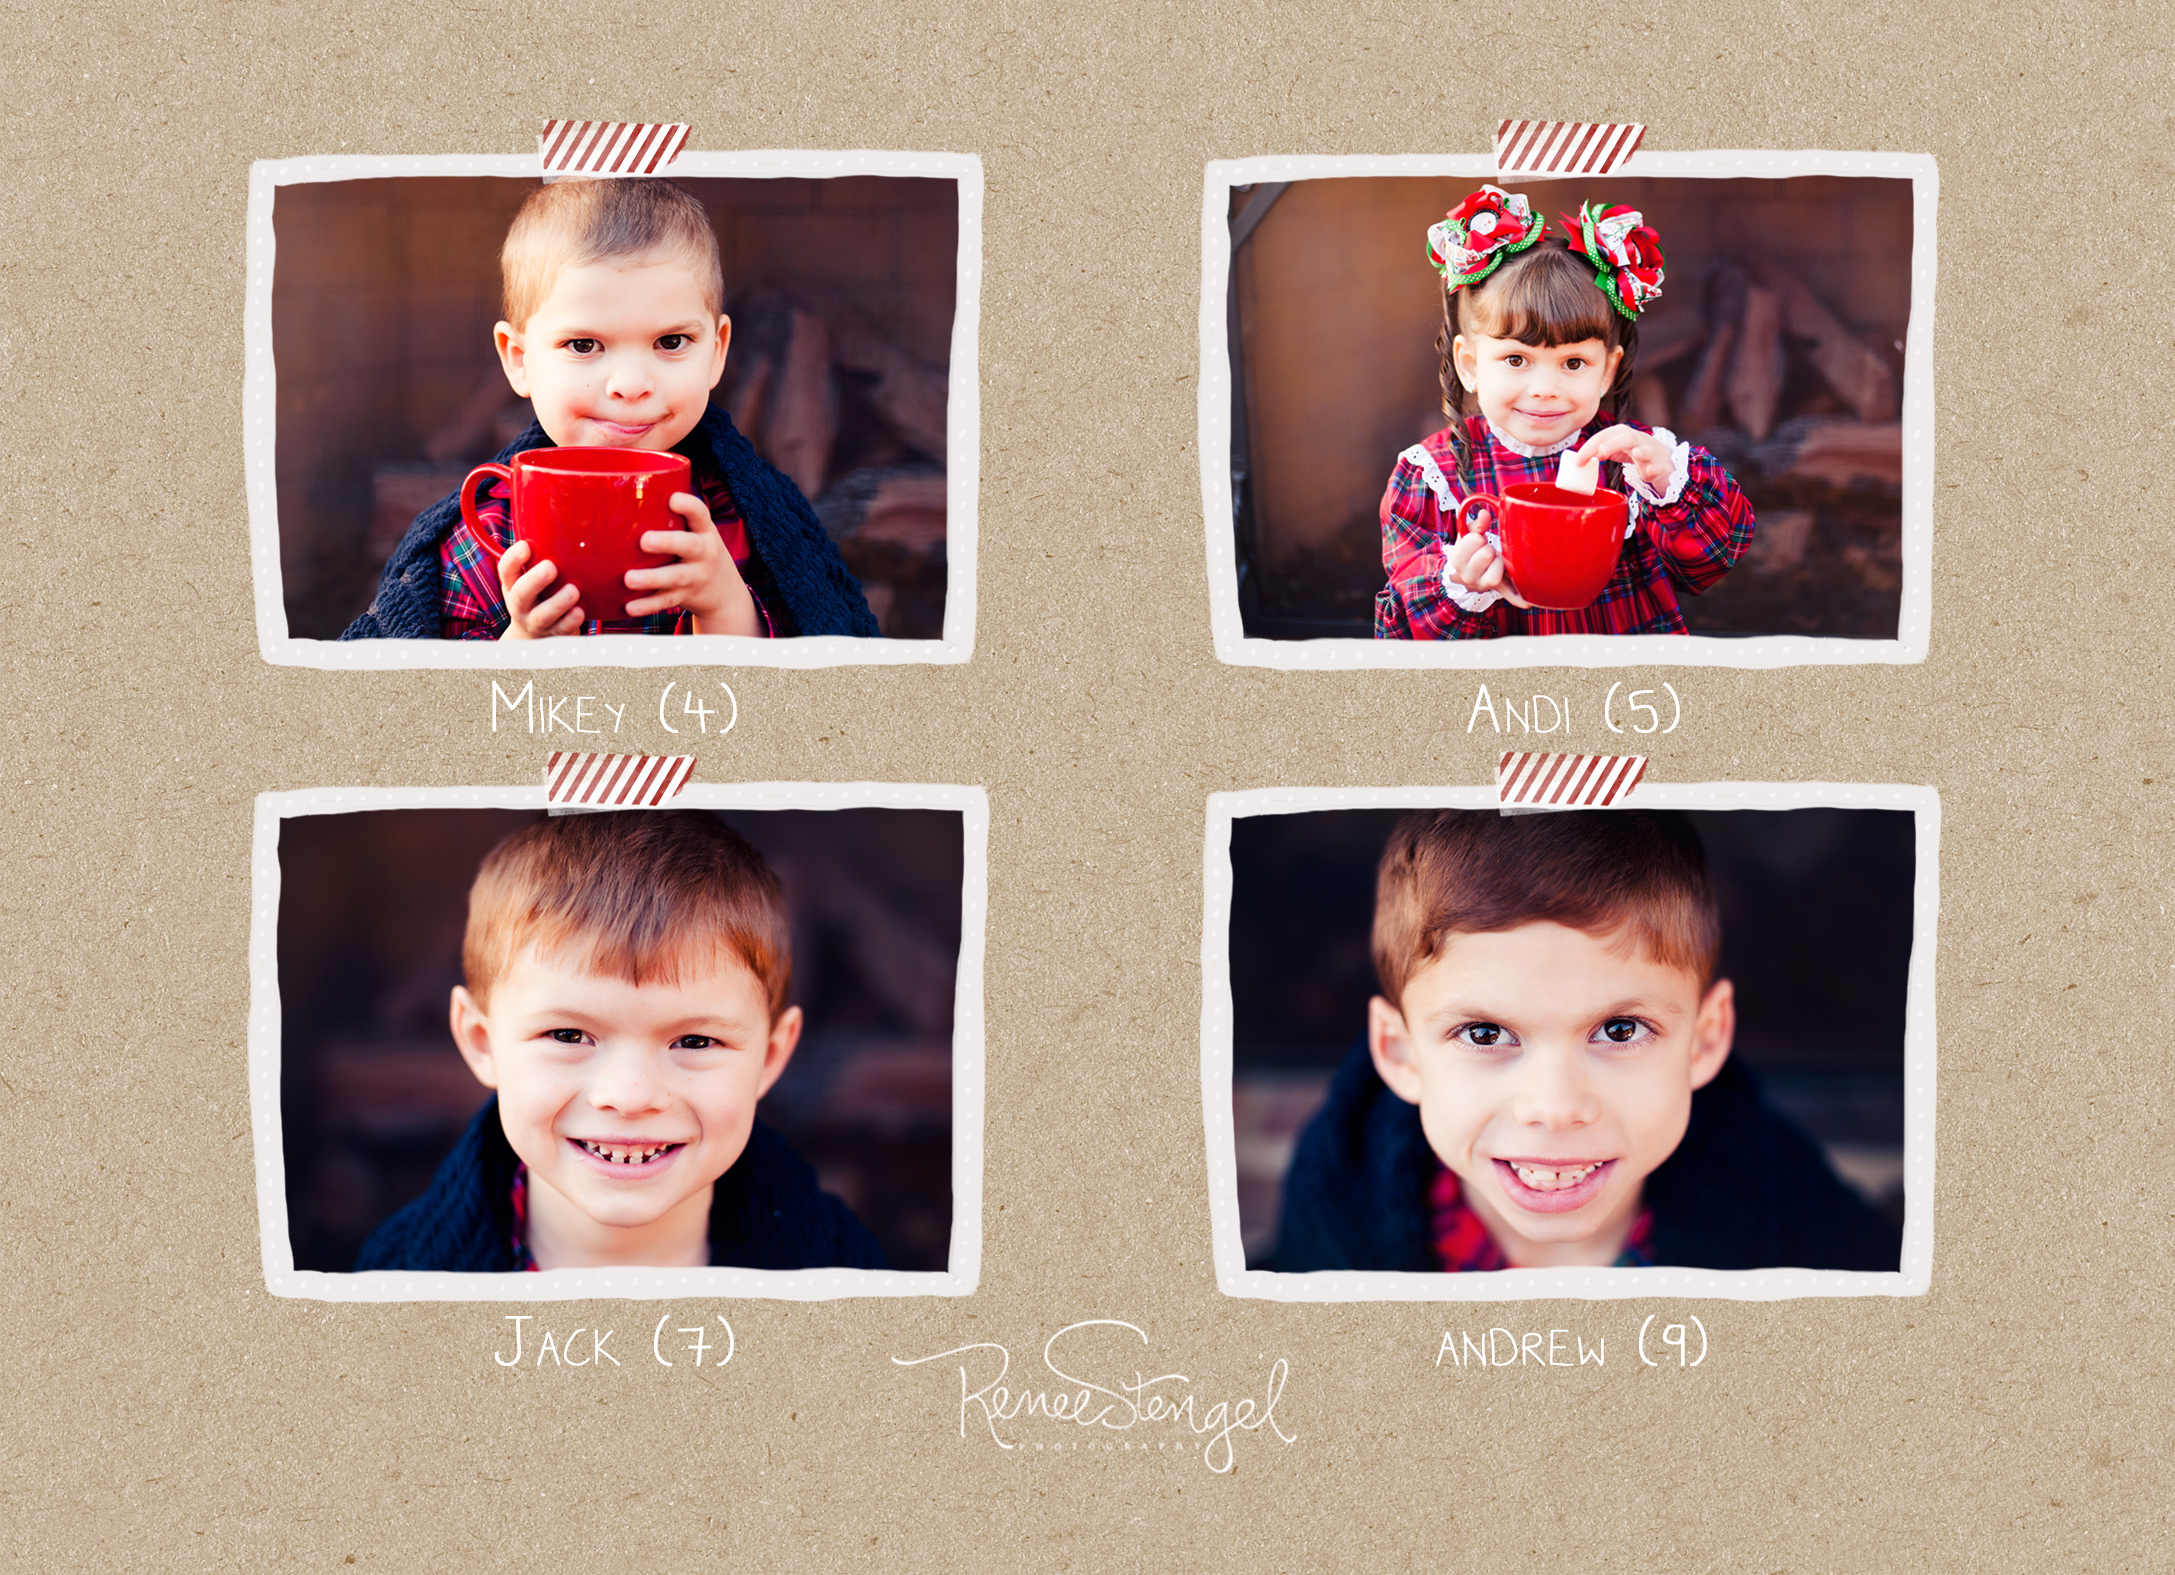 RENEE STENGEL Photography | Charlotte Underwater and Portrait Photographer | Holiday Fireside PJ Session | Hot Chocolate | Cookies and Milk Christmas Card